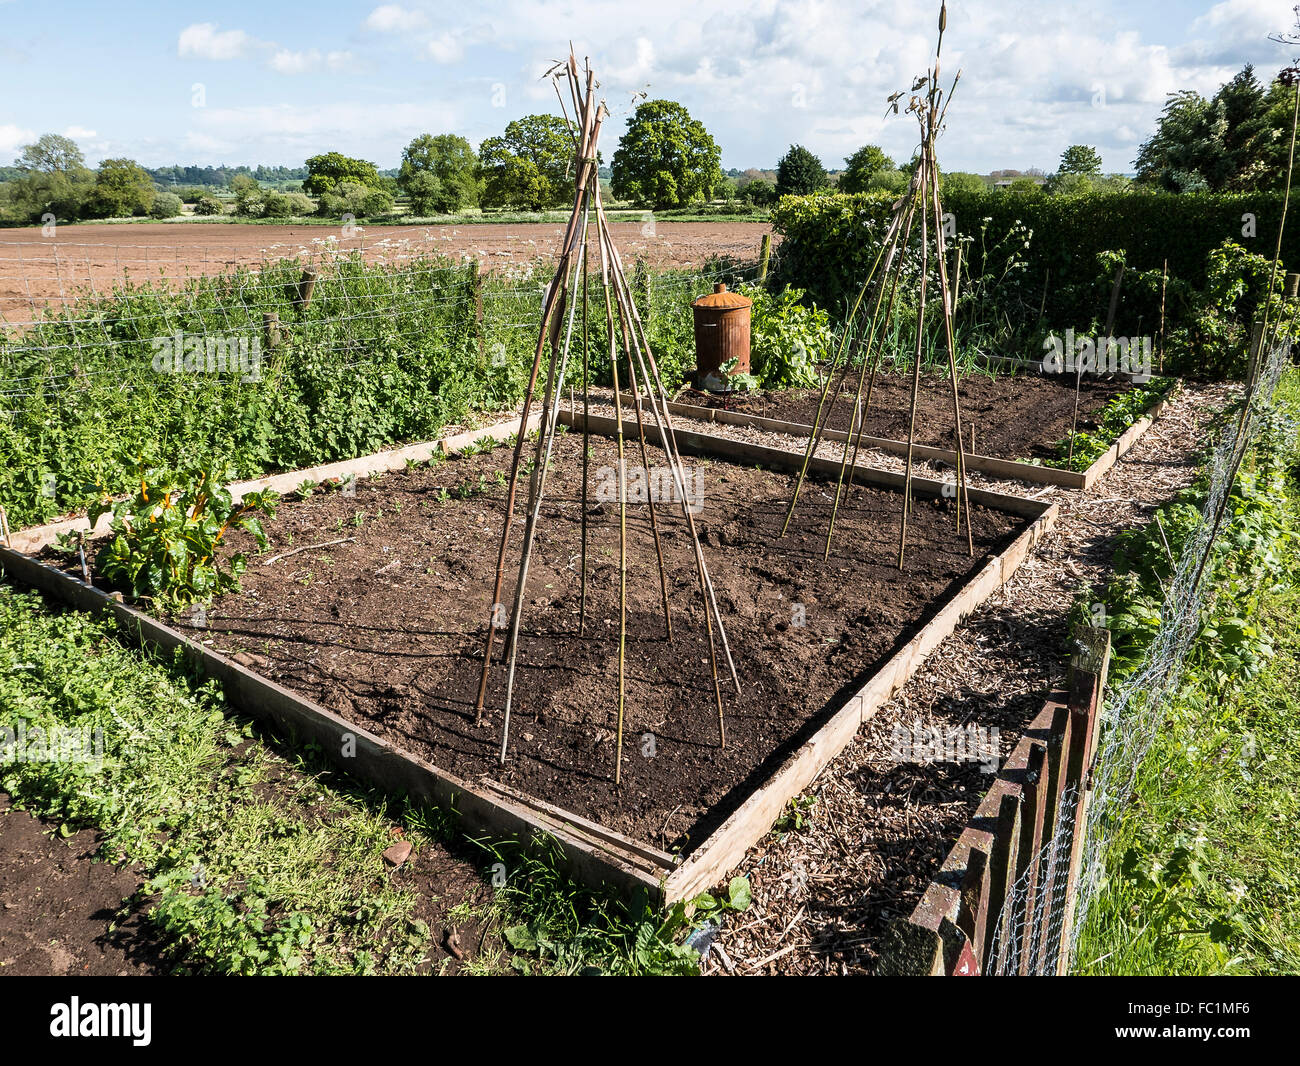 Enclosed vegetable beds ready for planting new season's crops Stock Photo